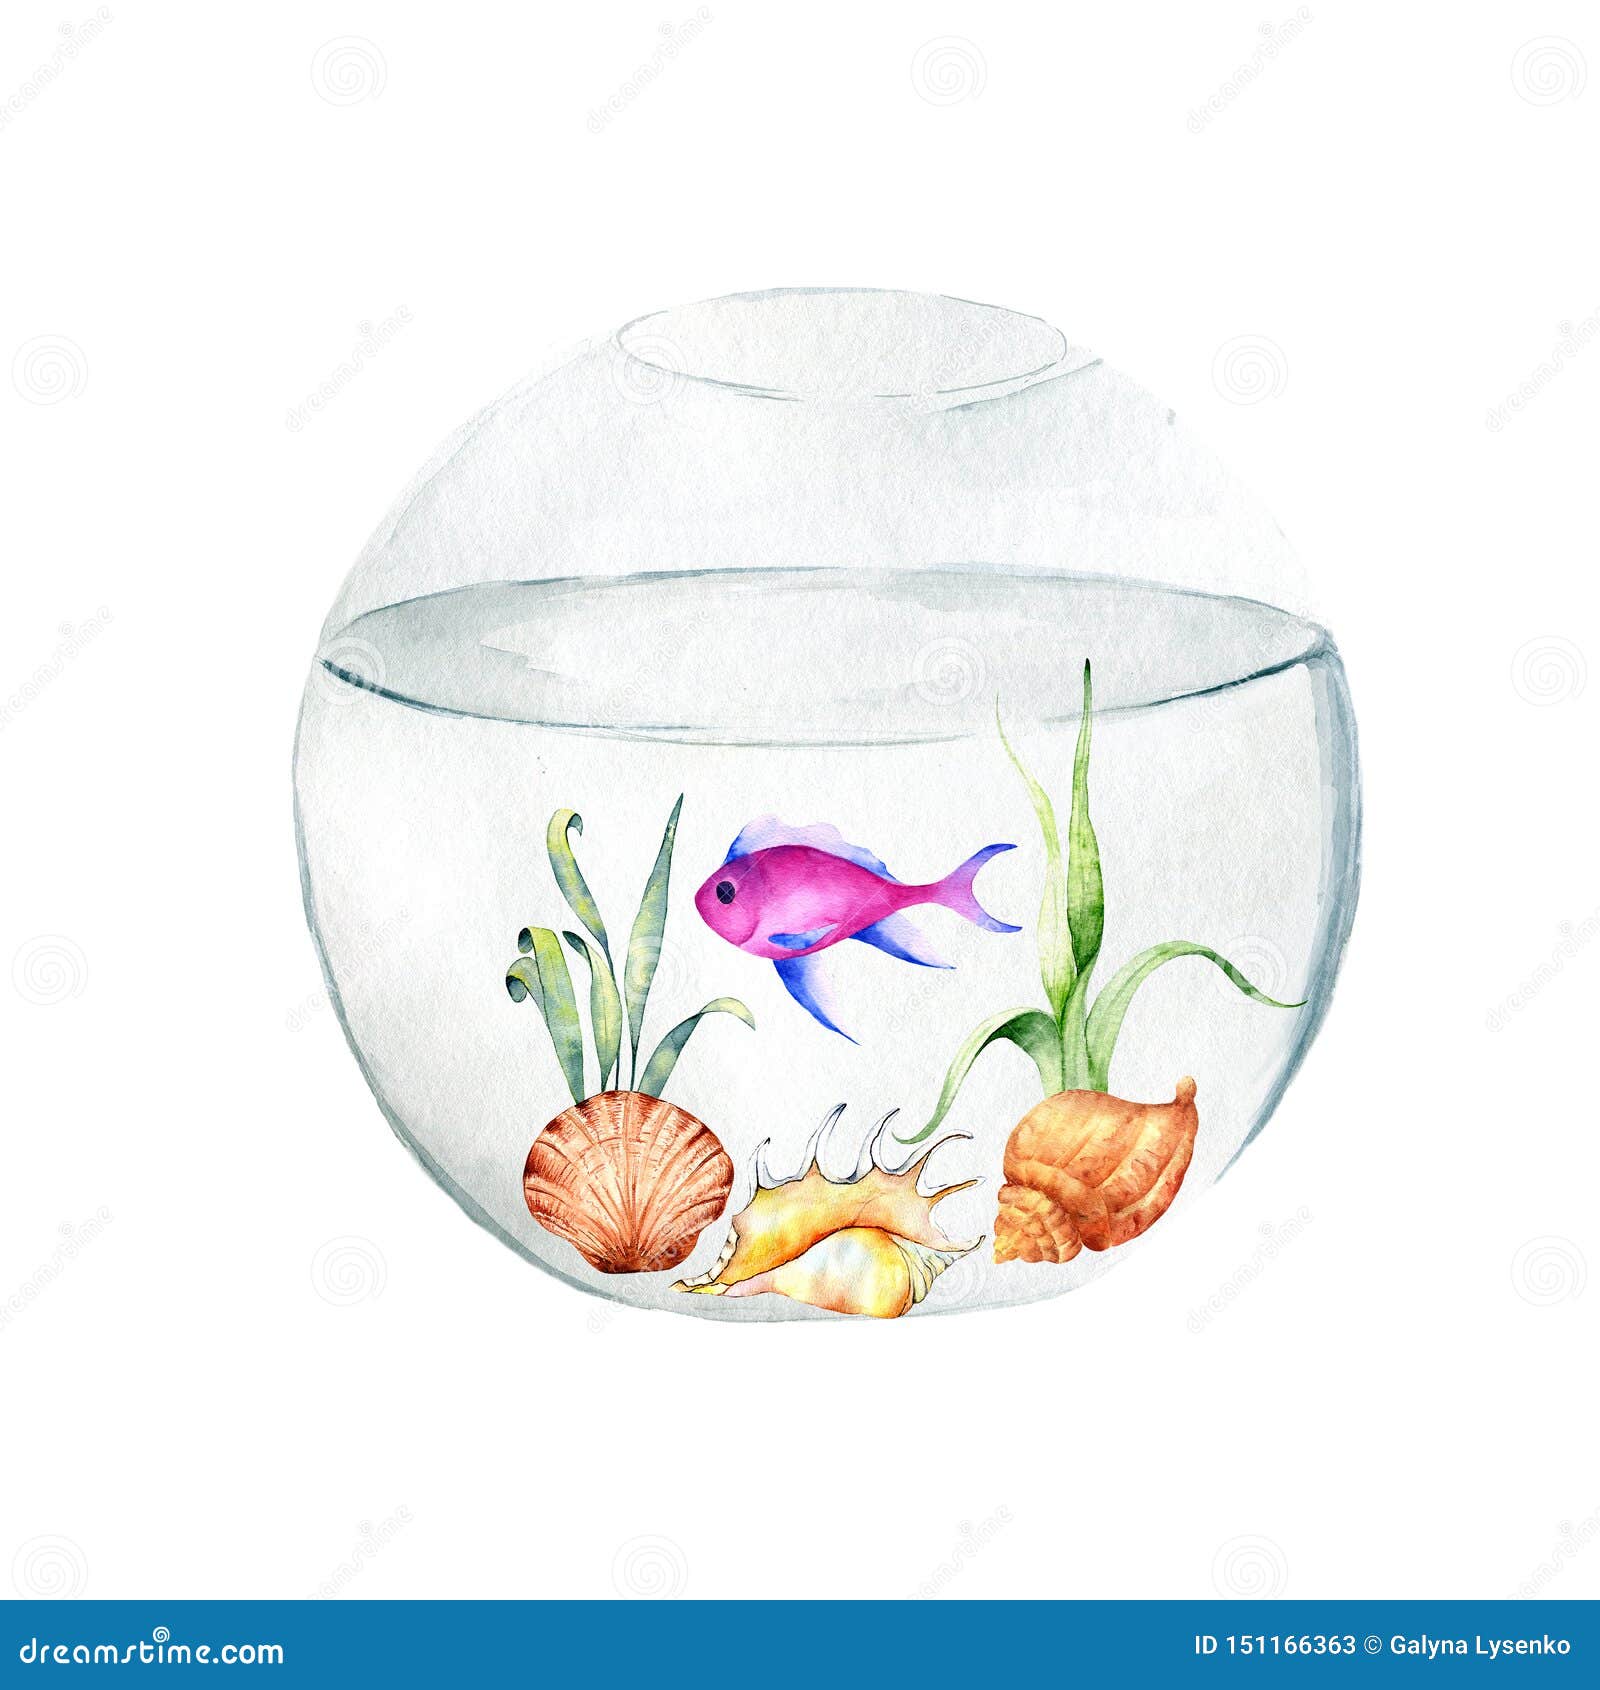 Complete Fish Tank Coloring Page - NetArt | Fish tank drawing, Fish  coloring page, Coloring pages